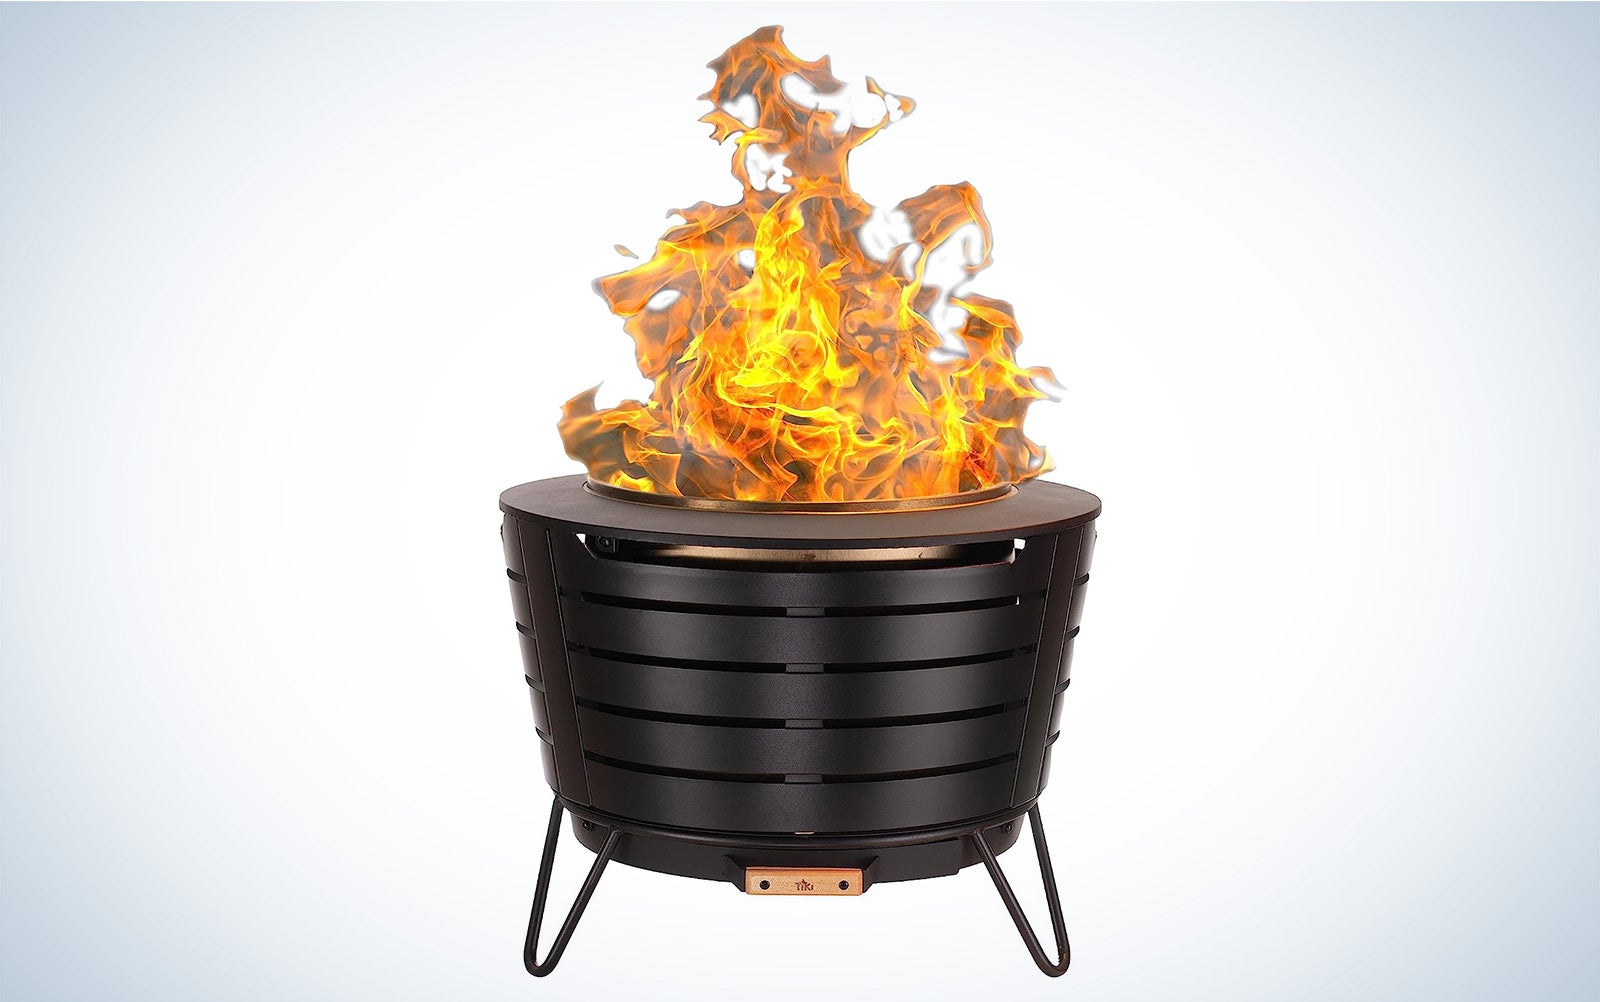 Tiki smokeless fire pit with a fire going in it